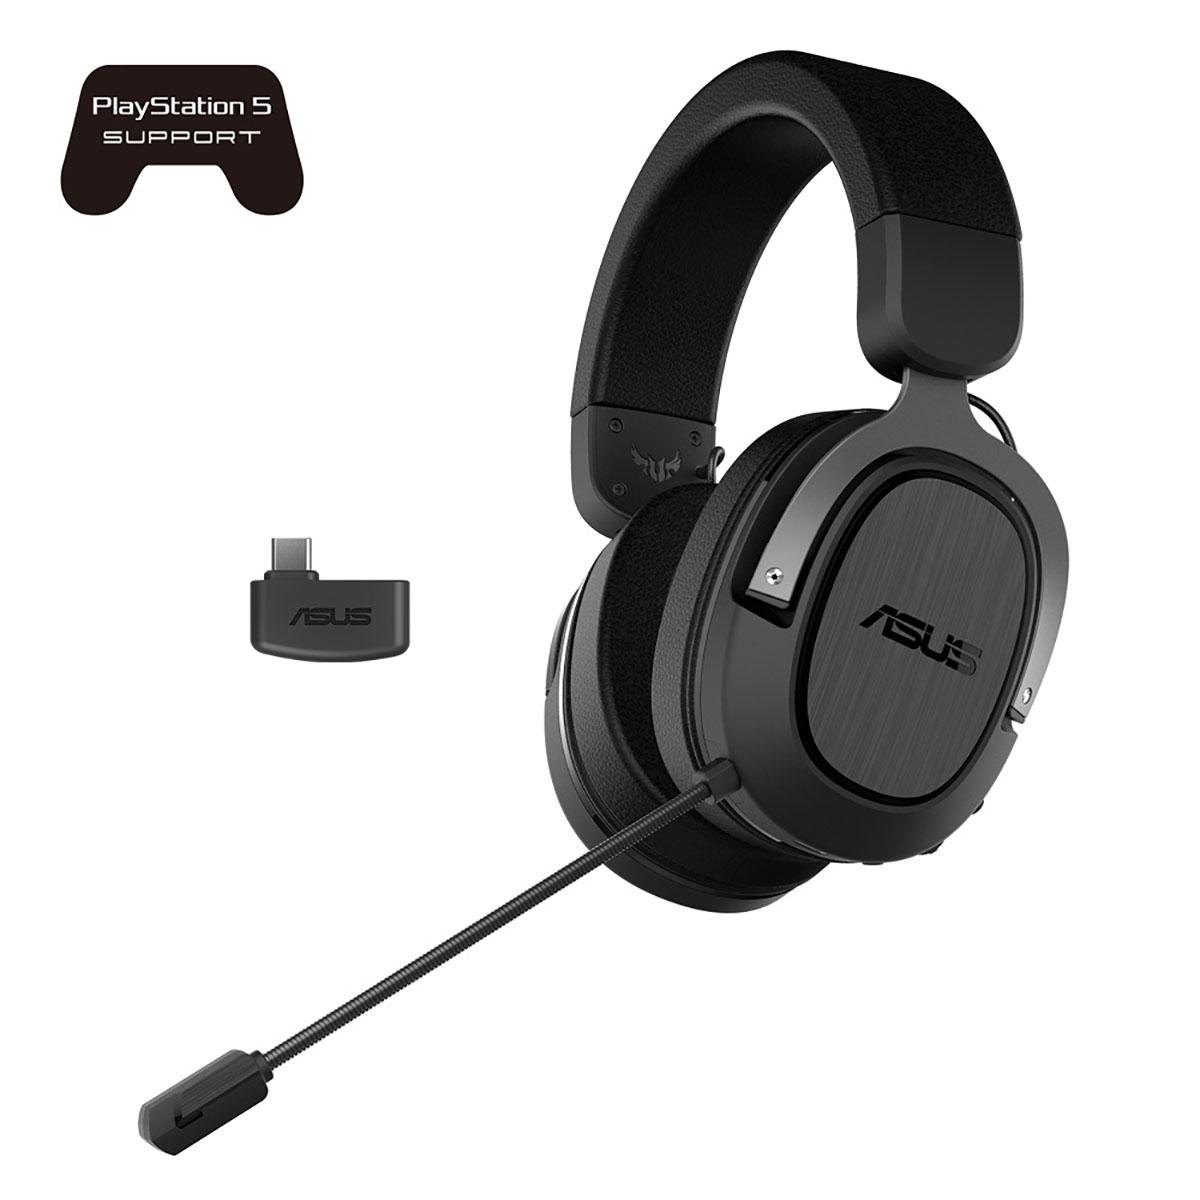 AUDIFONOS ASUS (TUF GAMING H3 WIRELESS) INALAMBRICOS USB-C,SONIDO 7.1,PC,MOVILES,PS5,SWITCH,NEGRO - TUF GAMING H3 WIRELESS